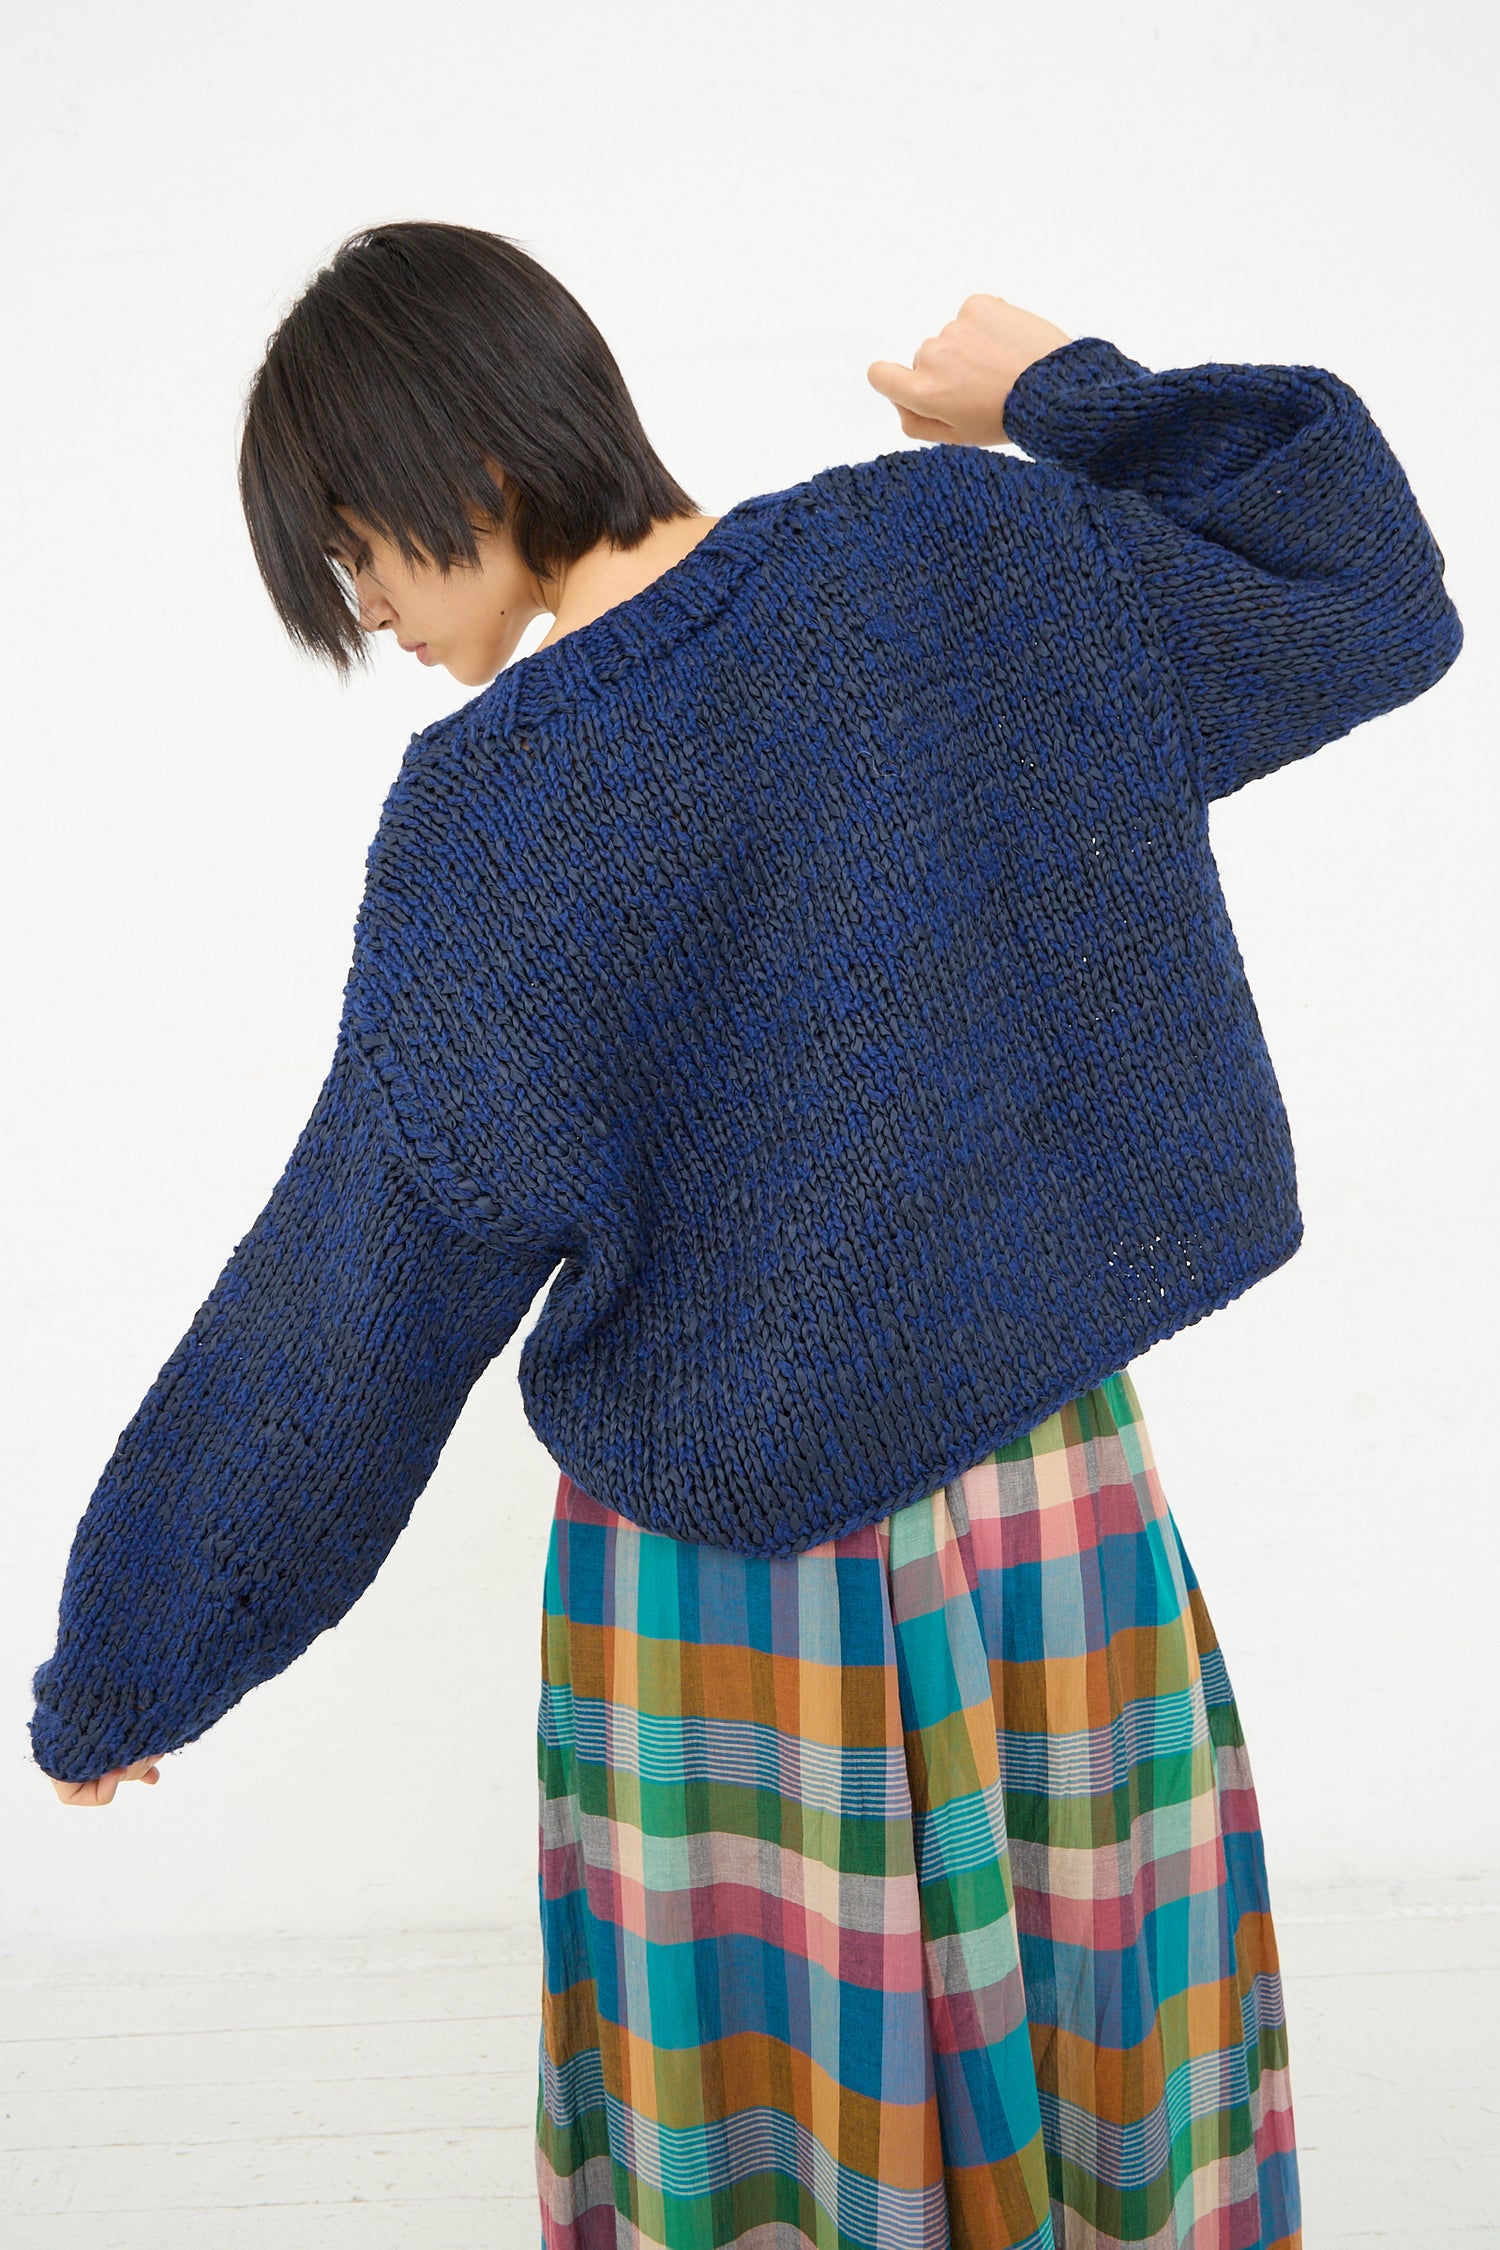 Woman in a Caron Callahan Boucle Cotton Yarn Hampton Sweater in Indigo and colorful skirt with her back turned.